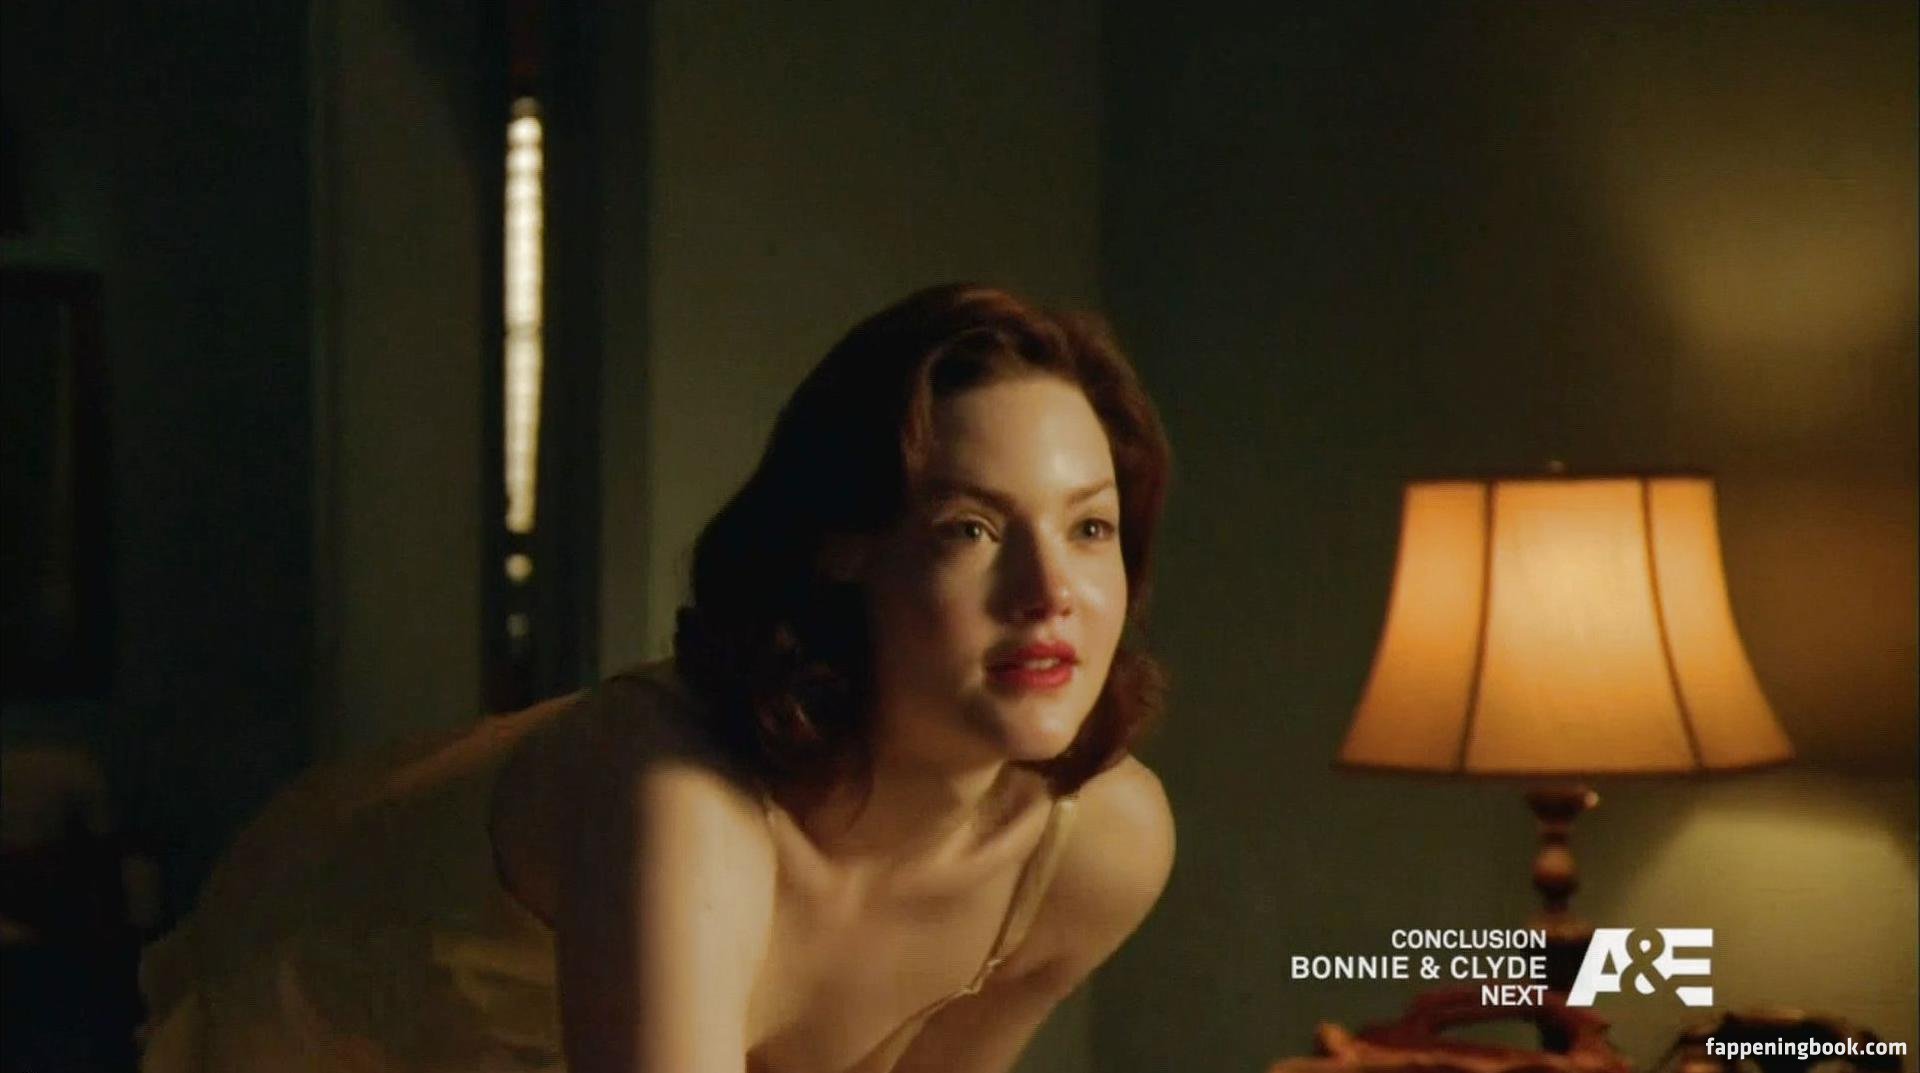 Holliday Grainger Nude, The Fappening - Photo #220196 - FappeningBook.